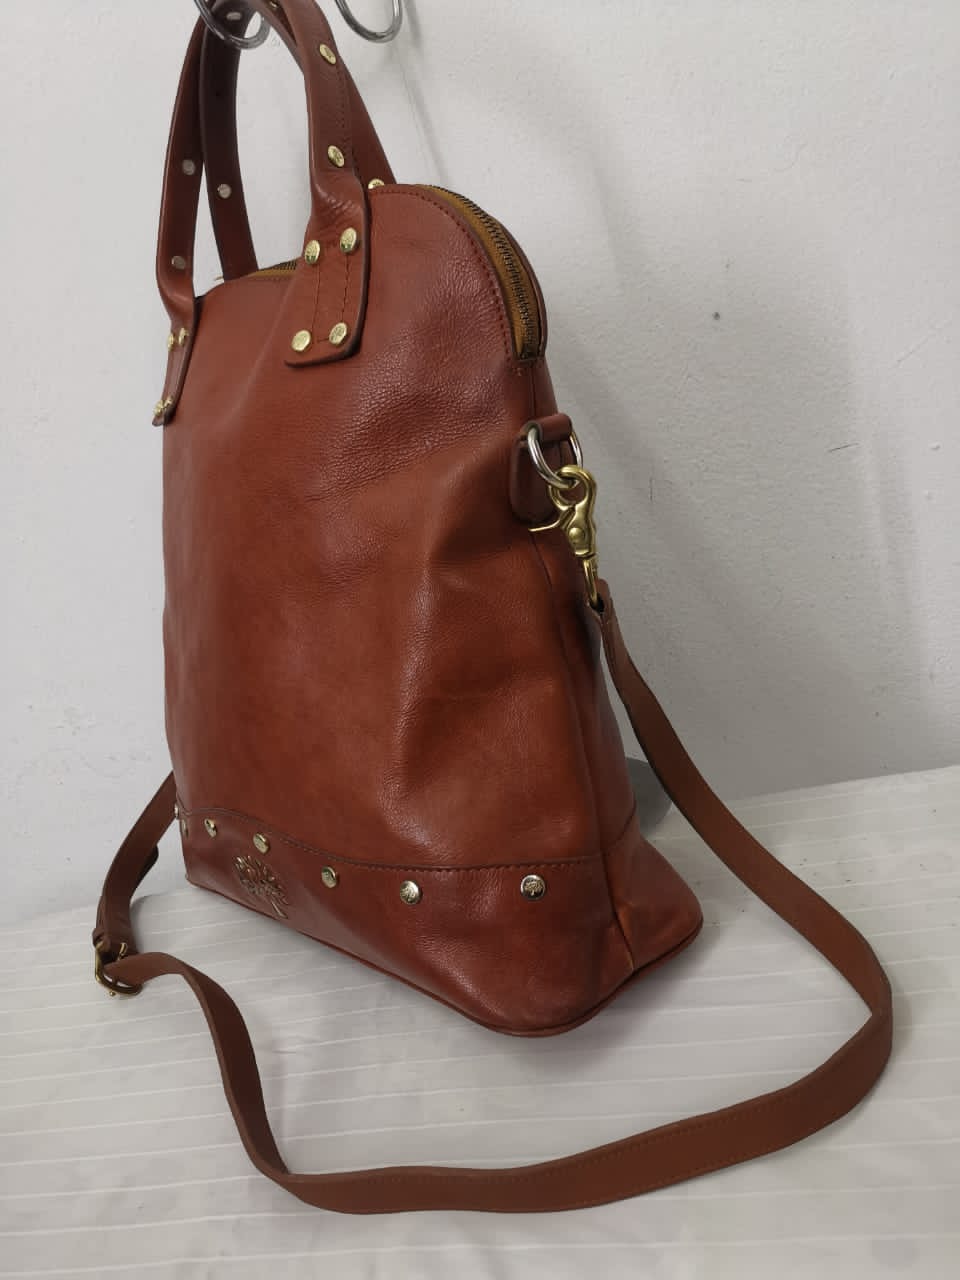 Vintage Mulberry Leather Handle Bag - 3